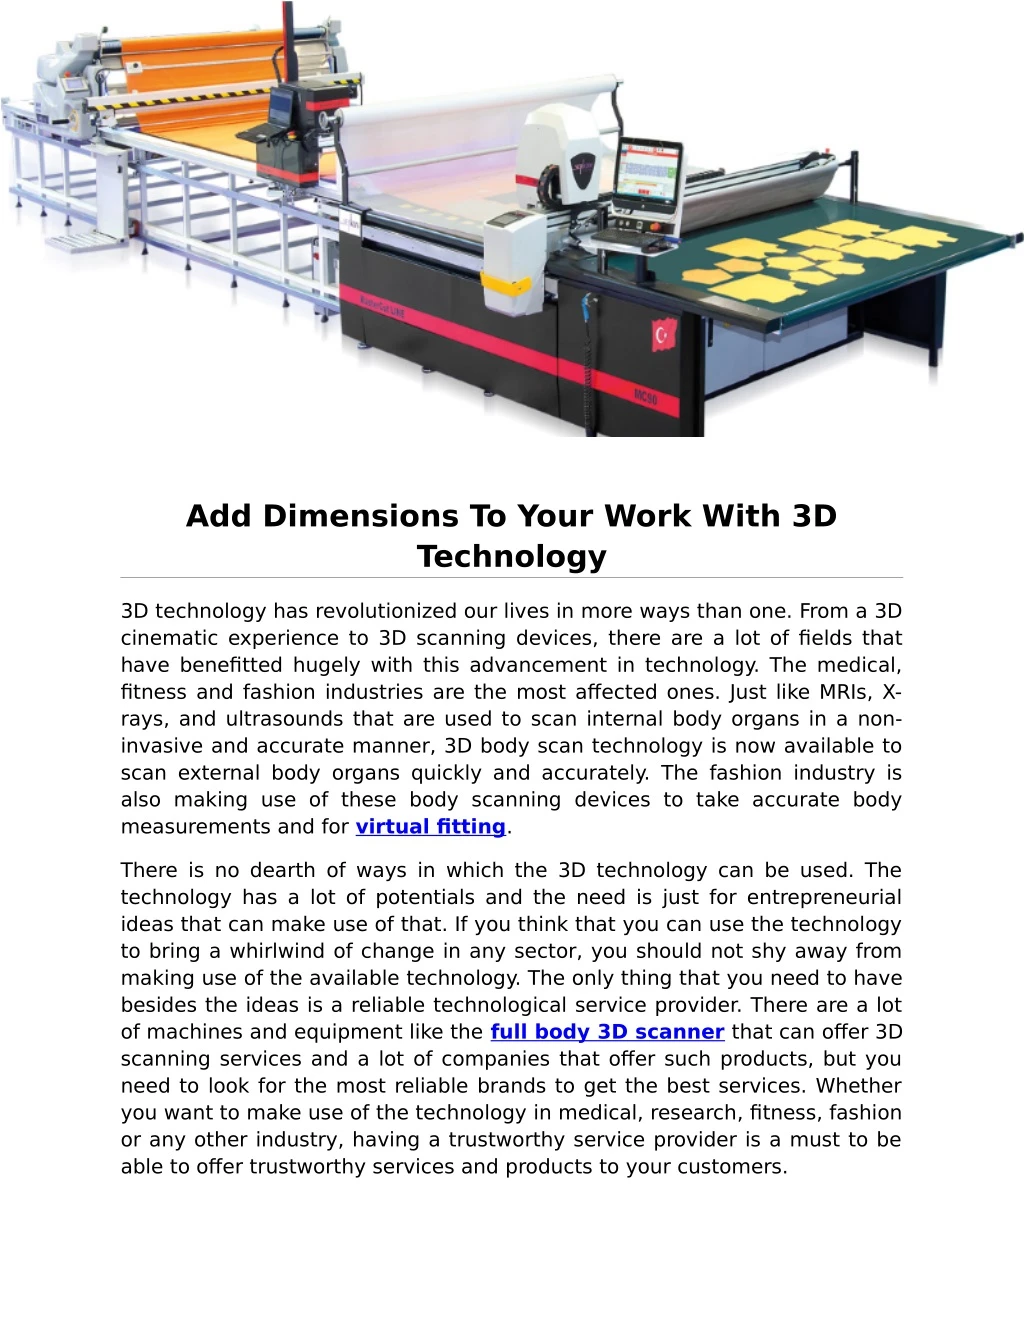 add dimensions to your work with 3d technology